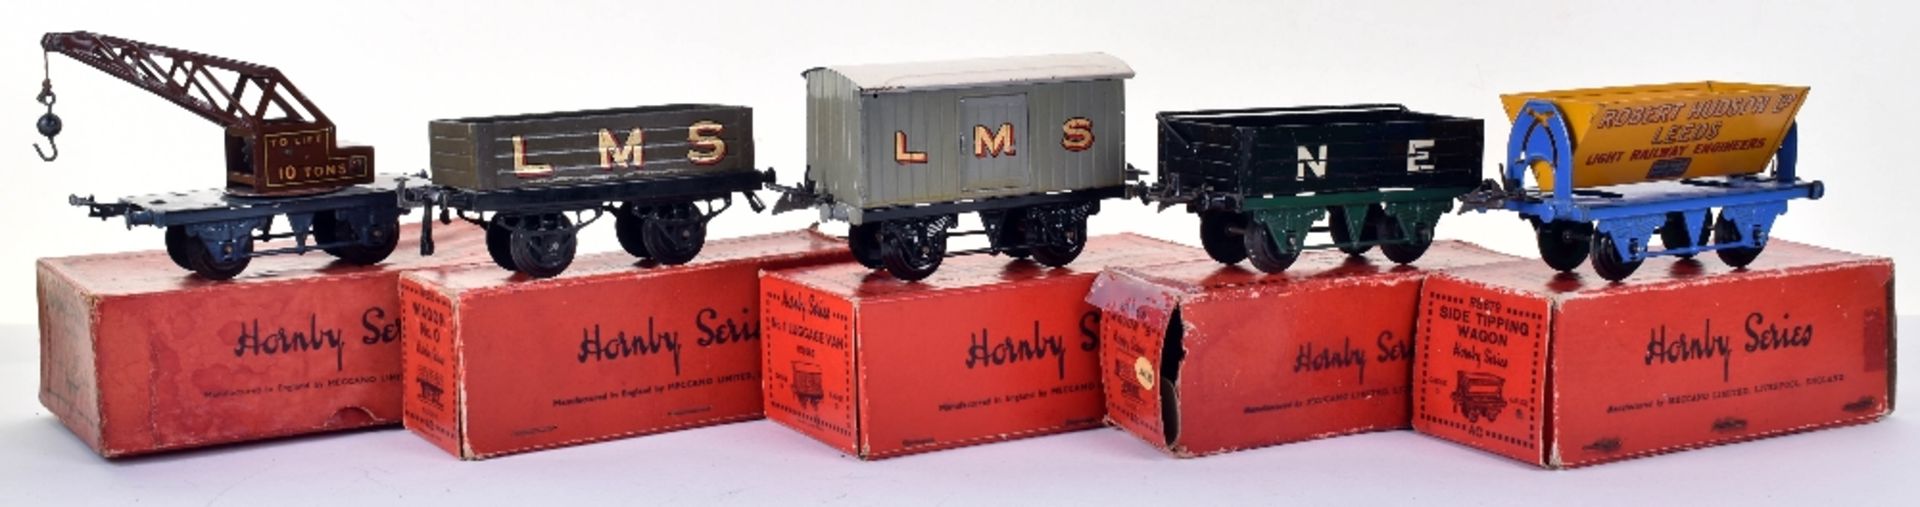 Hornby Series 0 gauge boxed rolling stock - Image 3 of 4